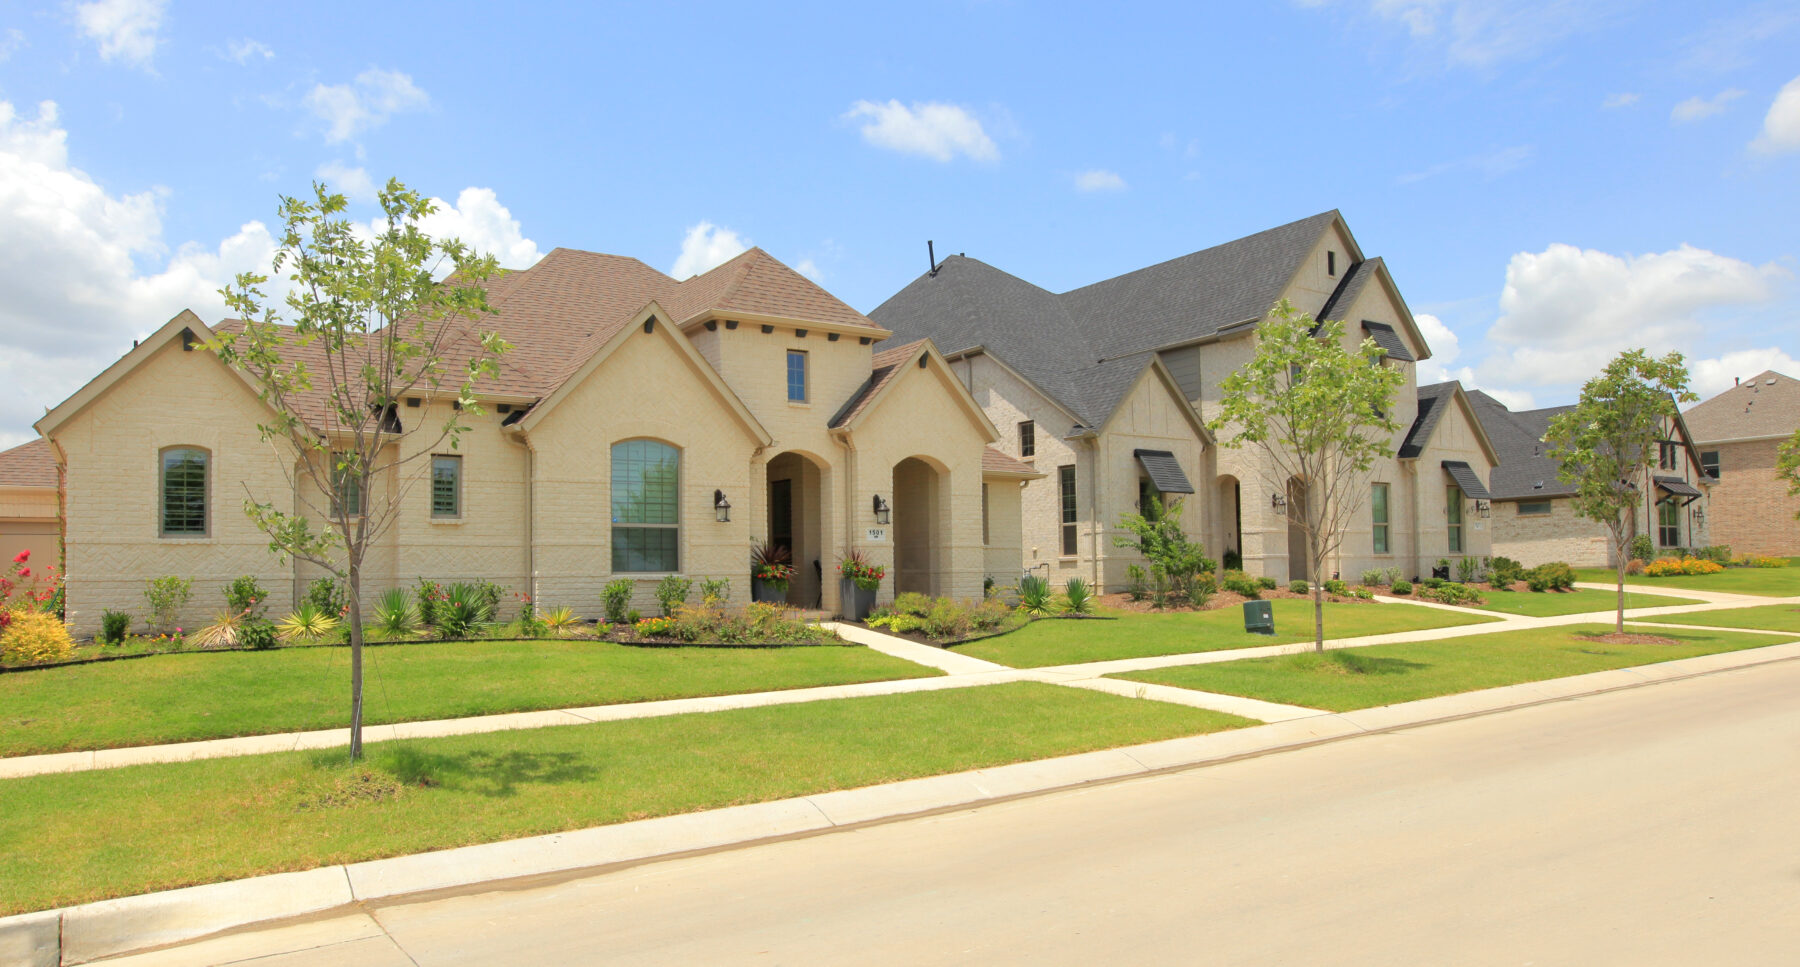 Homes in the DFW Metroplex